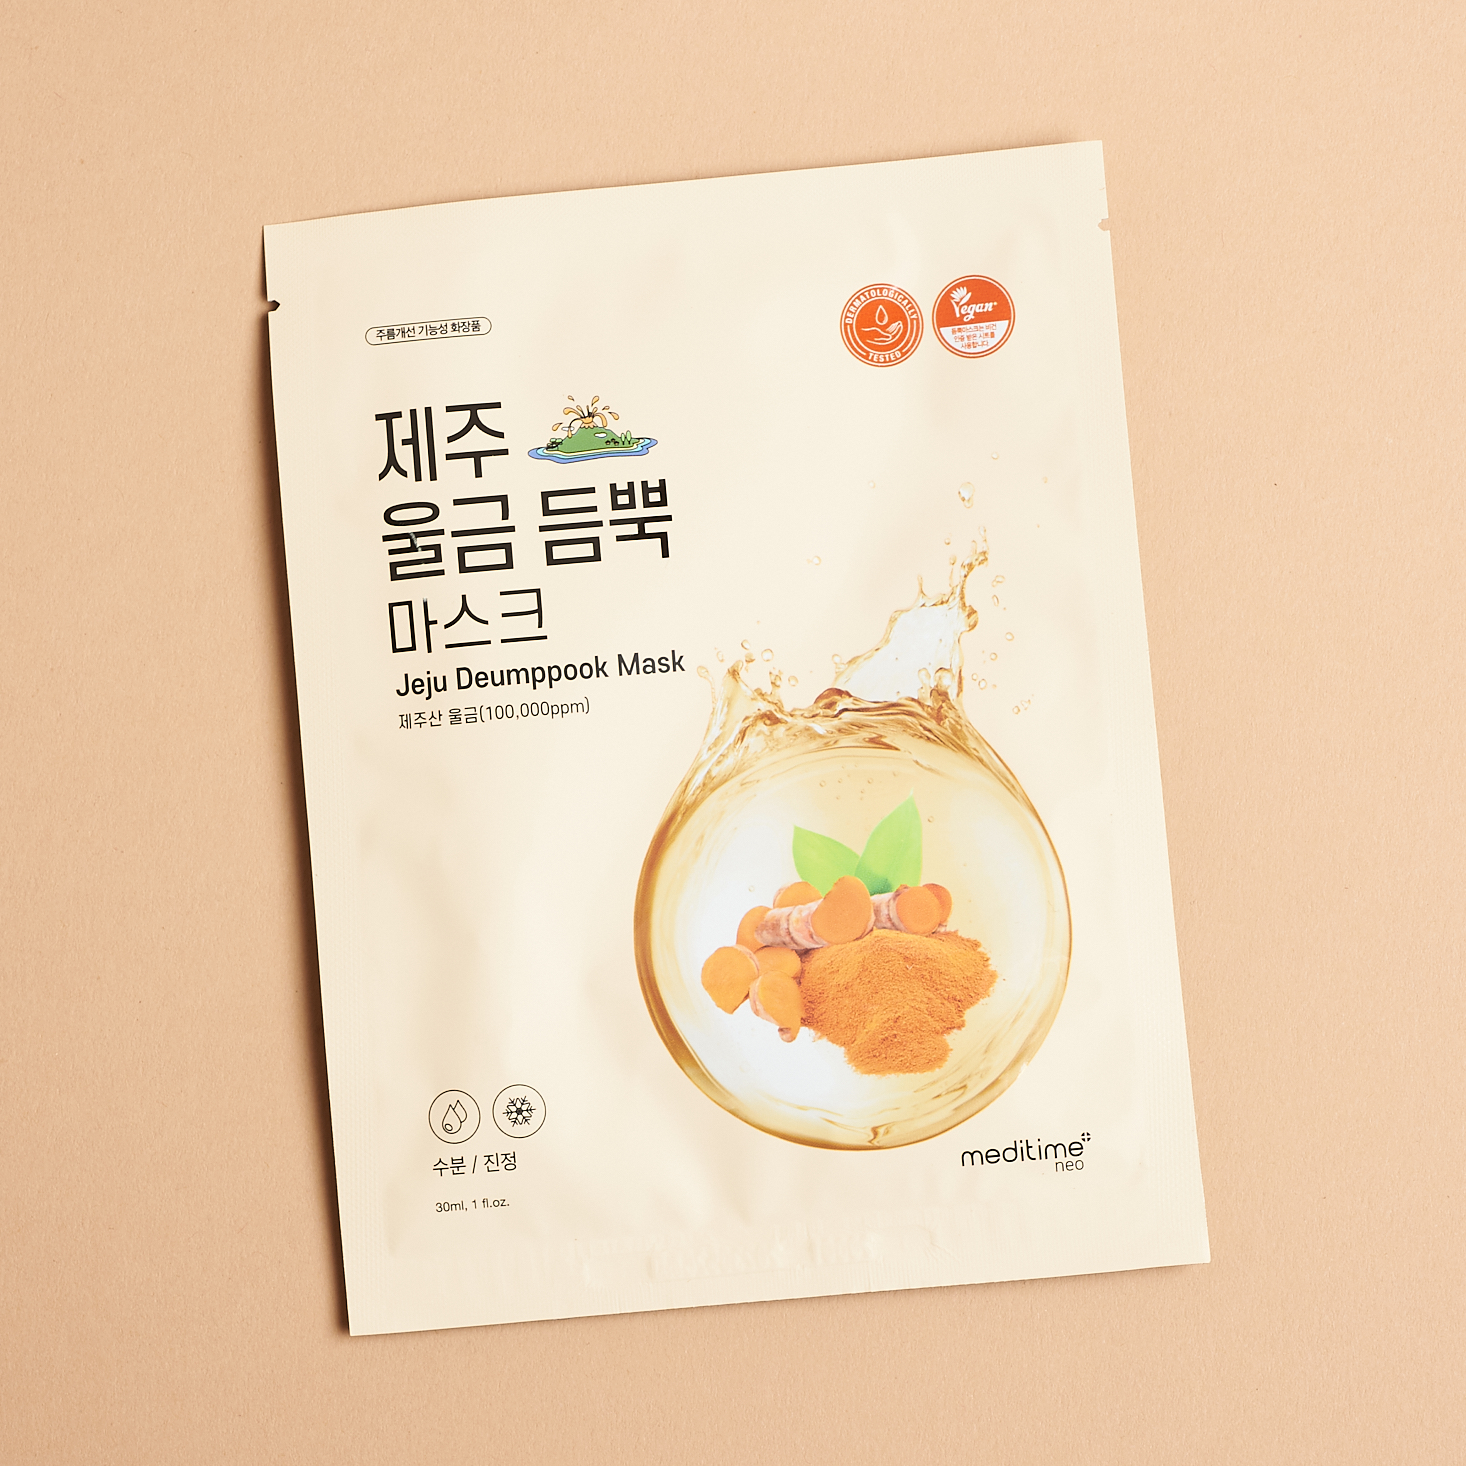 tan sheet mask with Korean characters prominently featured